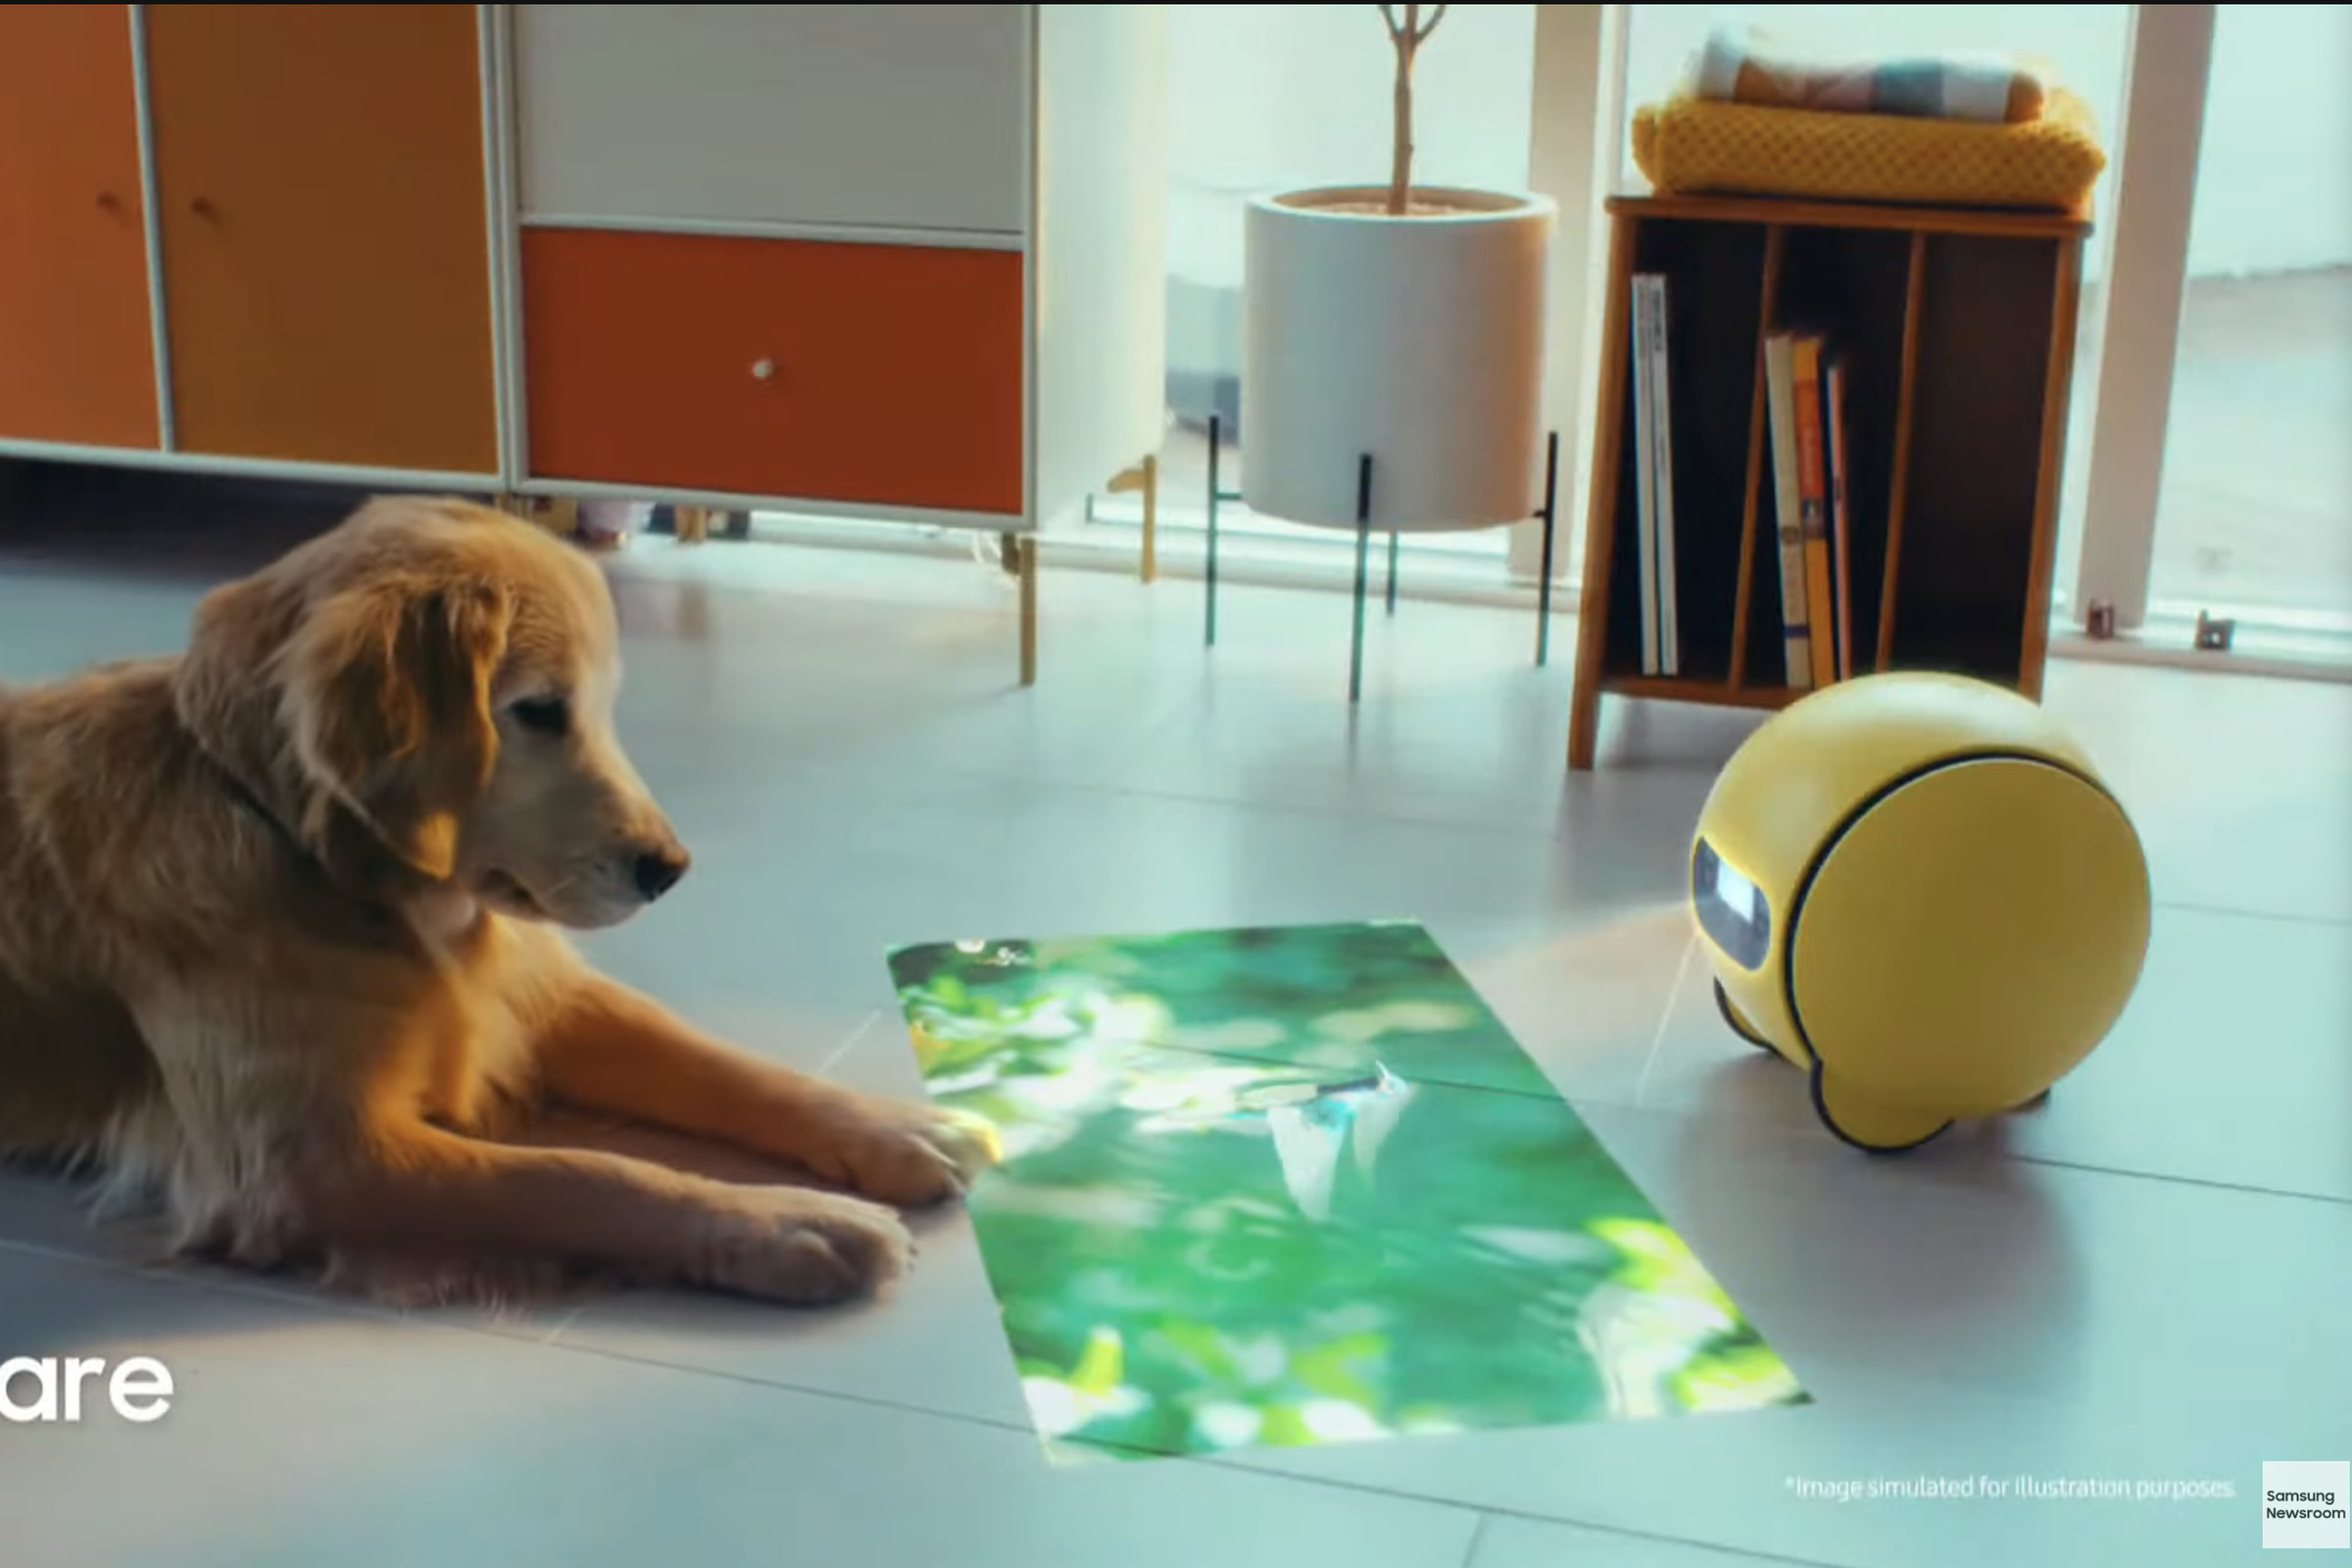 A picture of Ballie, which is small, yellow, and round, projecting an image on the floor in front of a golden retriever.